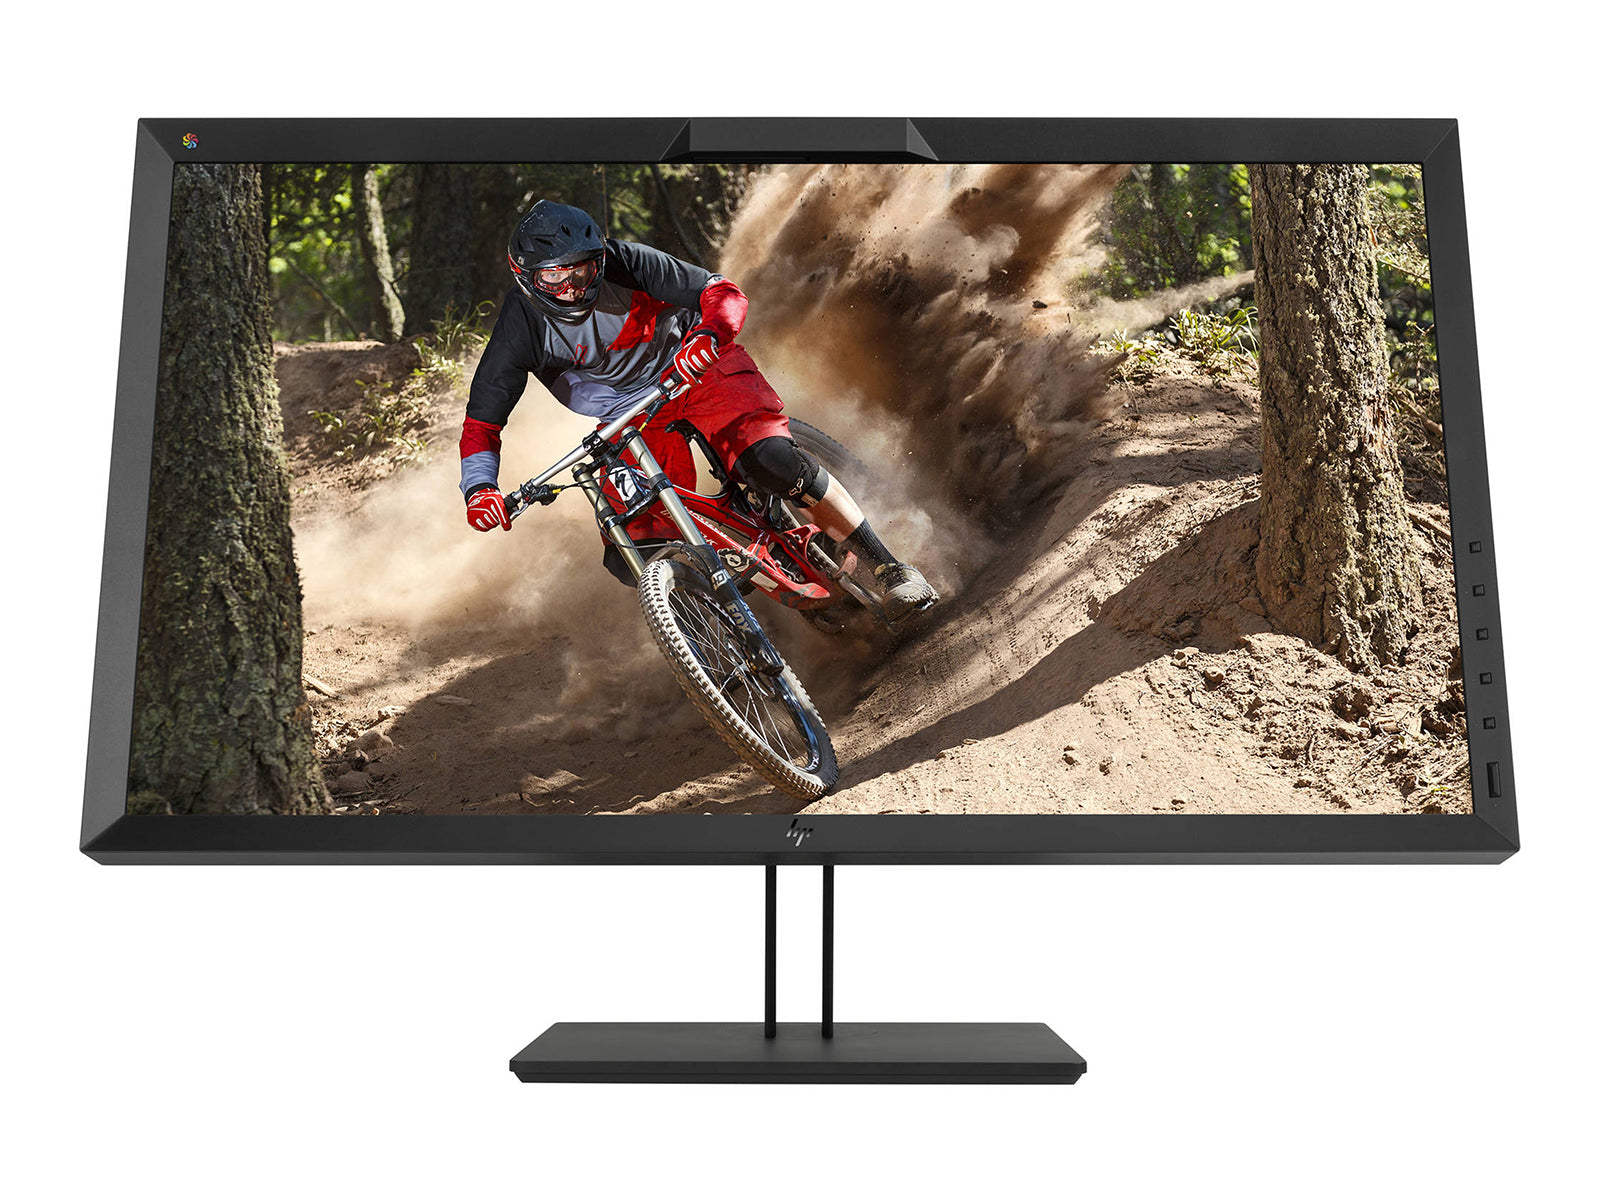 HP DreamColor Z31x 4K 31" Farb-LED-Display-Monitor (Z4Y82A8#ABA) Monitors.com